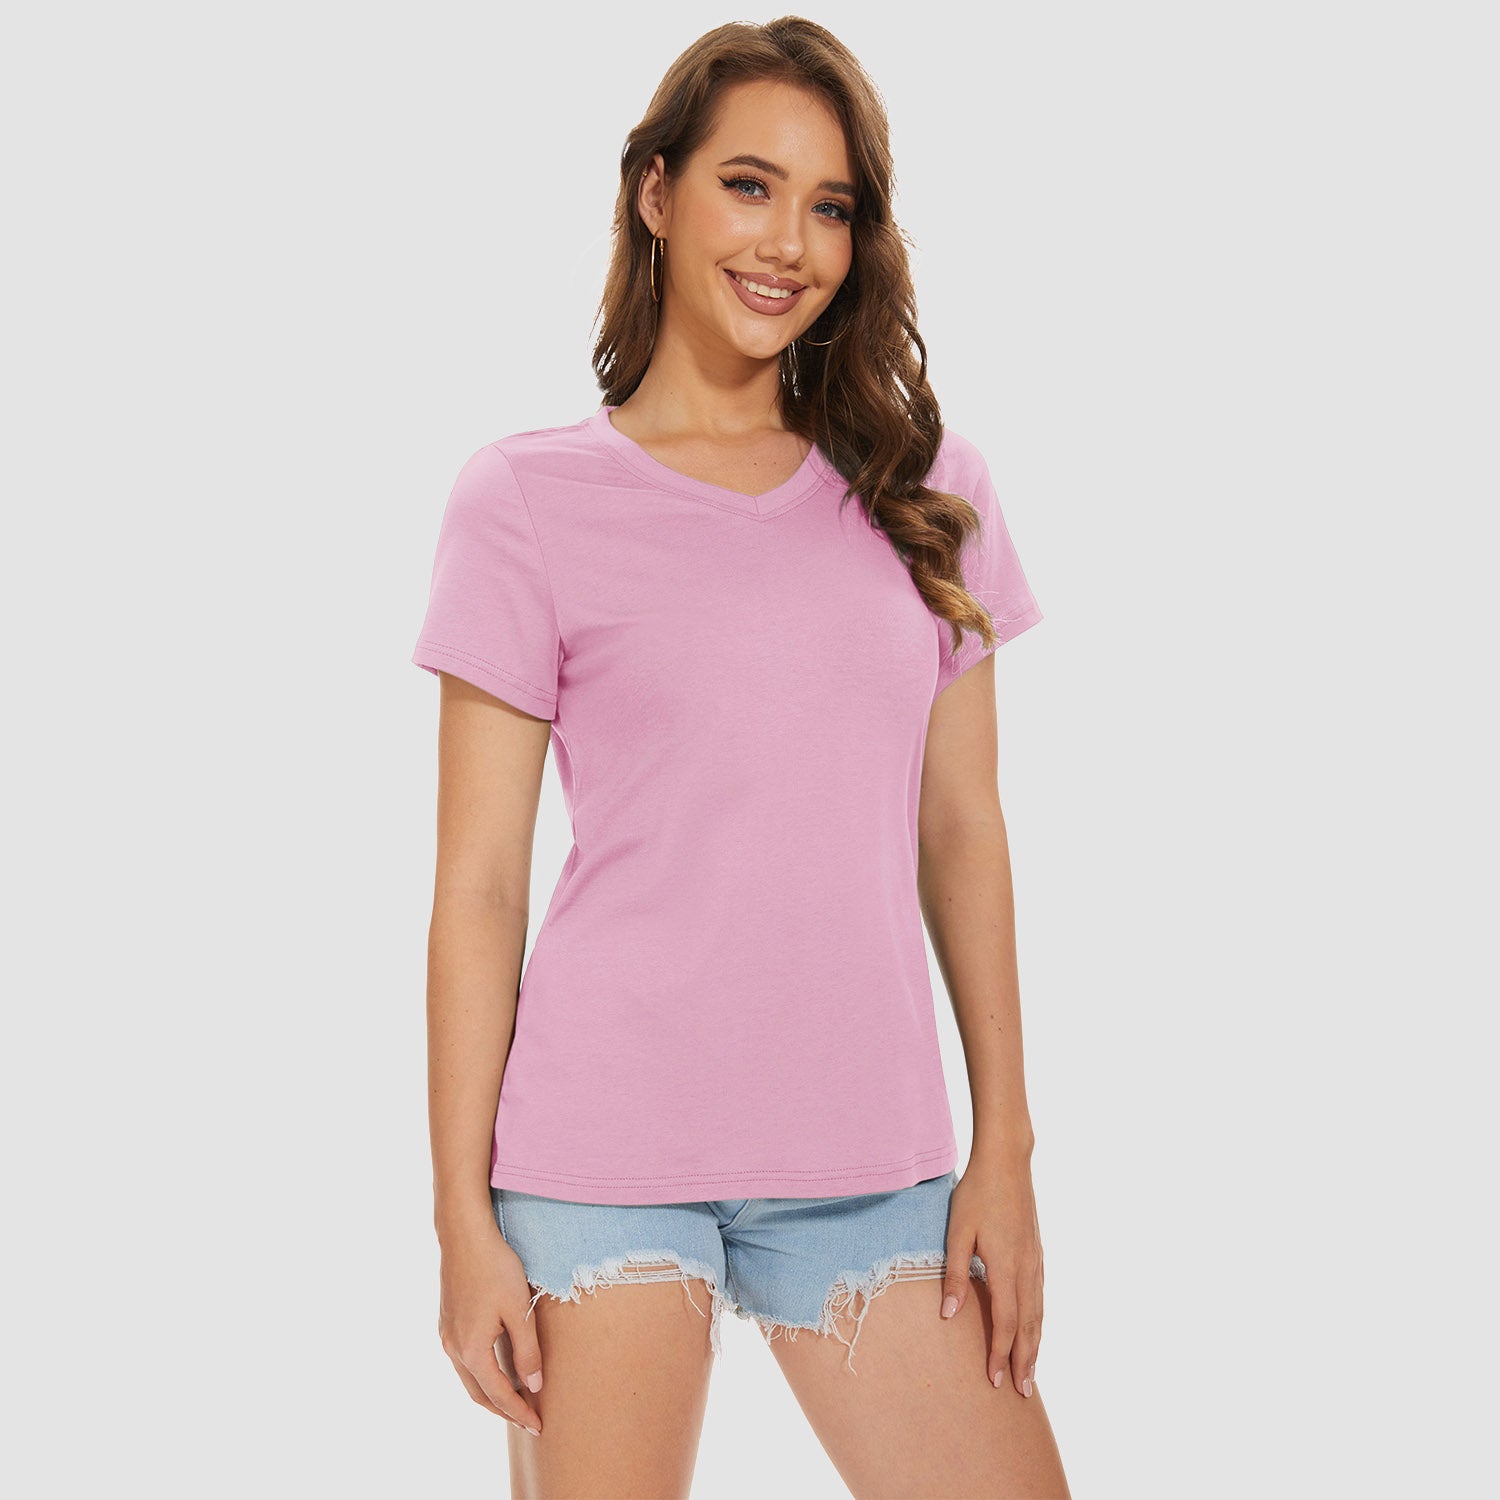 Womens V-Neck T-Shirt Short Sleeve Moisture Wicking Athletic Tee Workout Activewear Cotton Basic Top